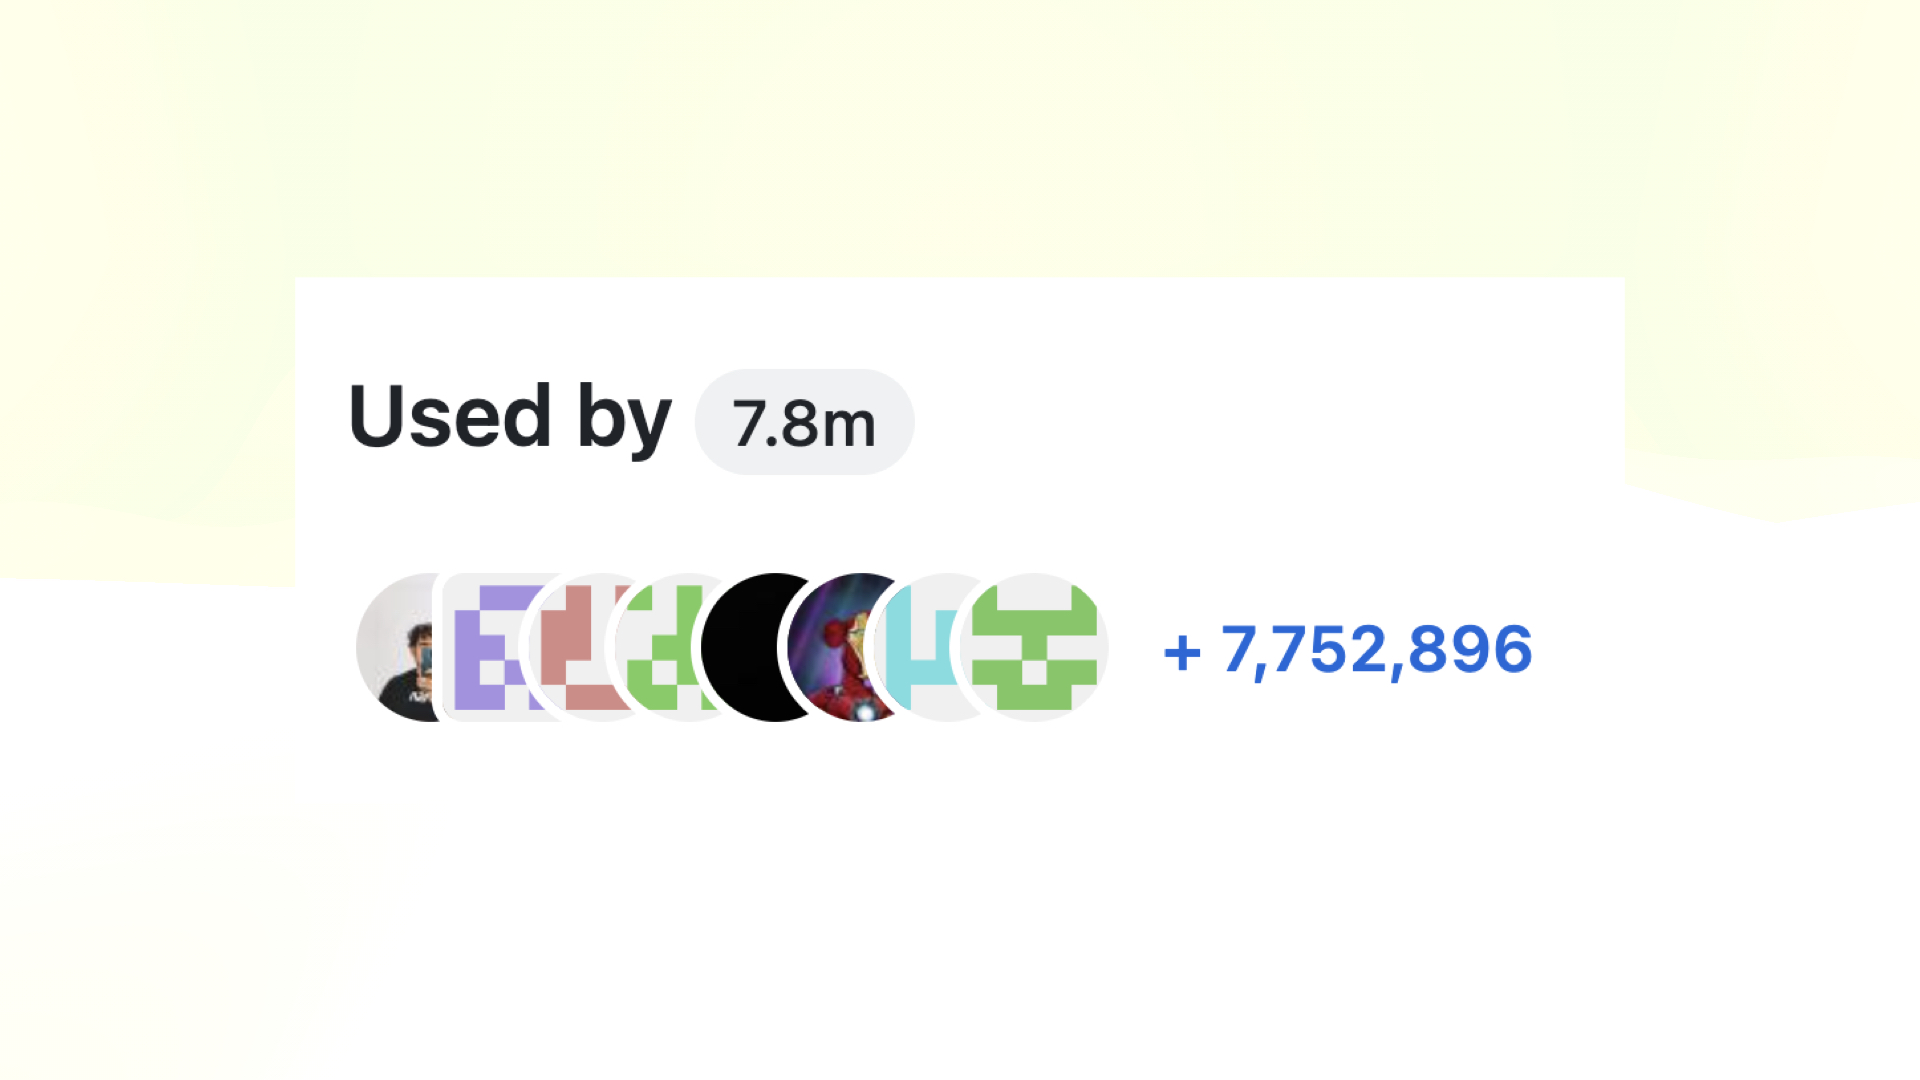 React Router's repo on GitHub is used by 7.8m other projects